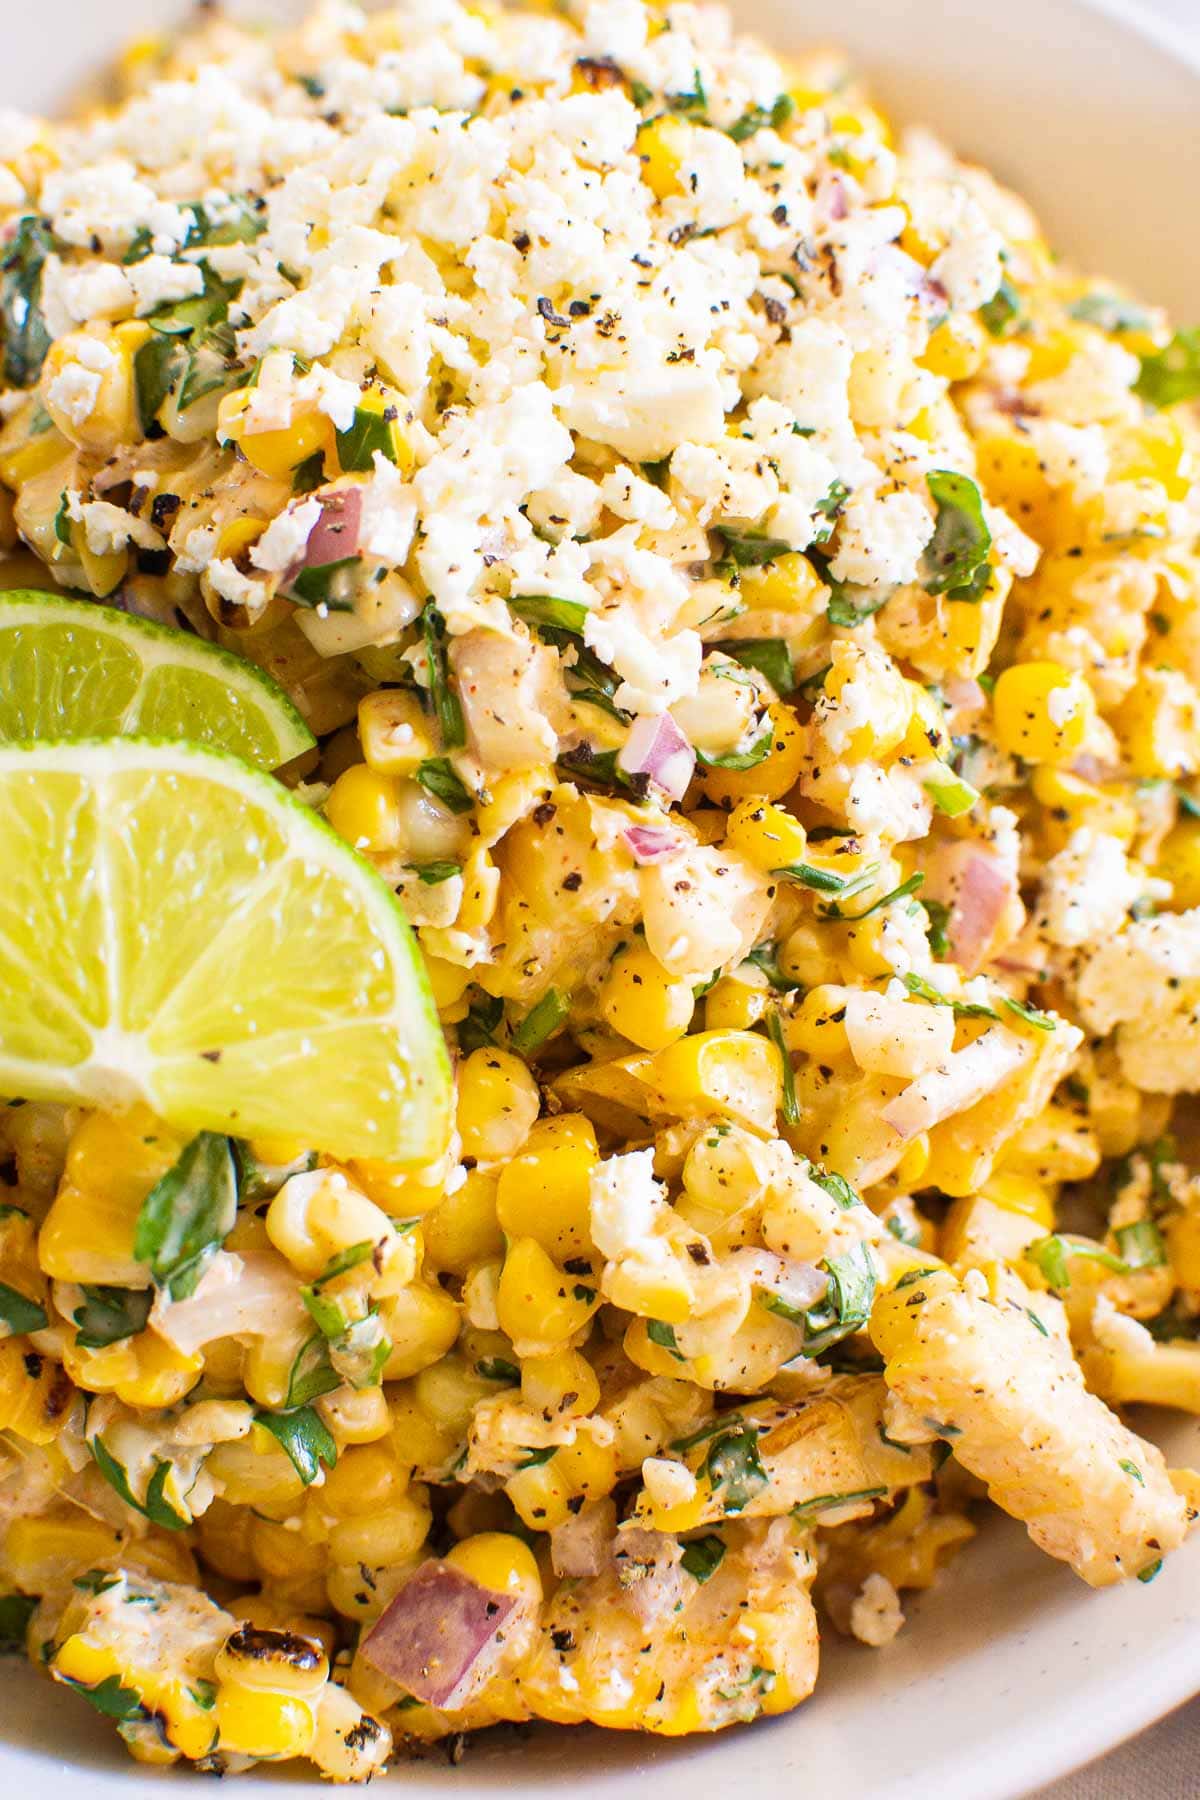 Healthy Mexican street corn salad recipe garnished with lime.